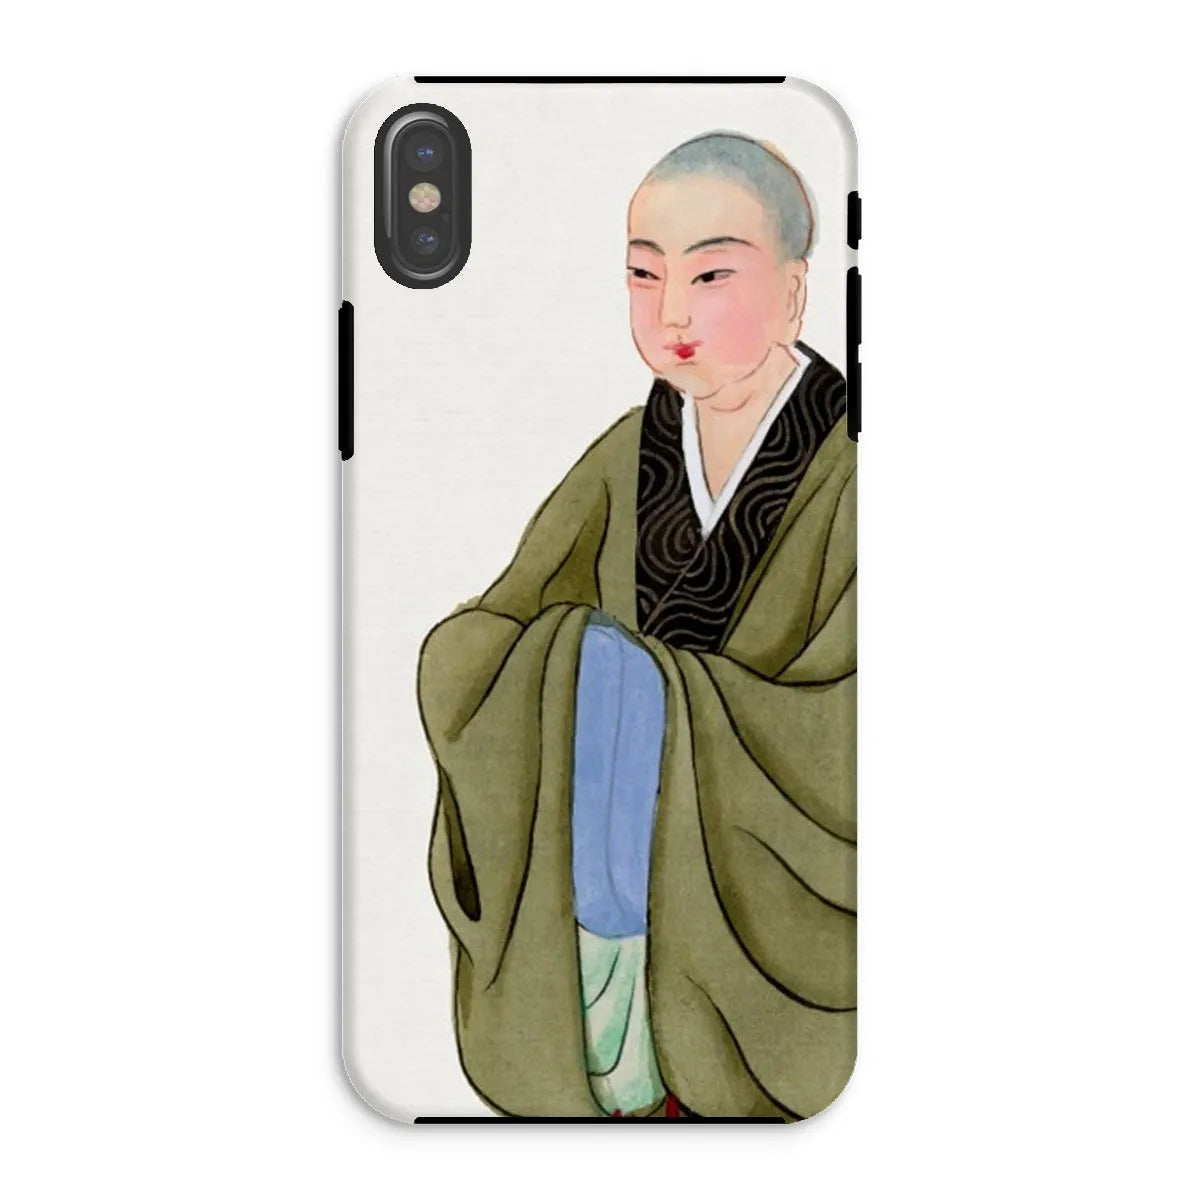 Buddhist Monk - Manchu Chinese Aesthetic Art Phone Case - Iphone Xs / Matte - Mobile Phone Cases - Aesthetic Art